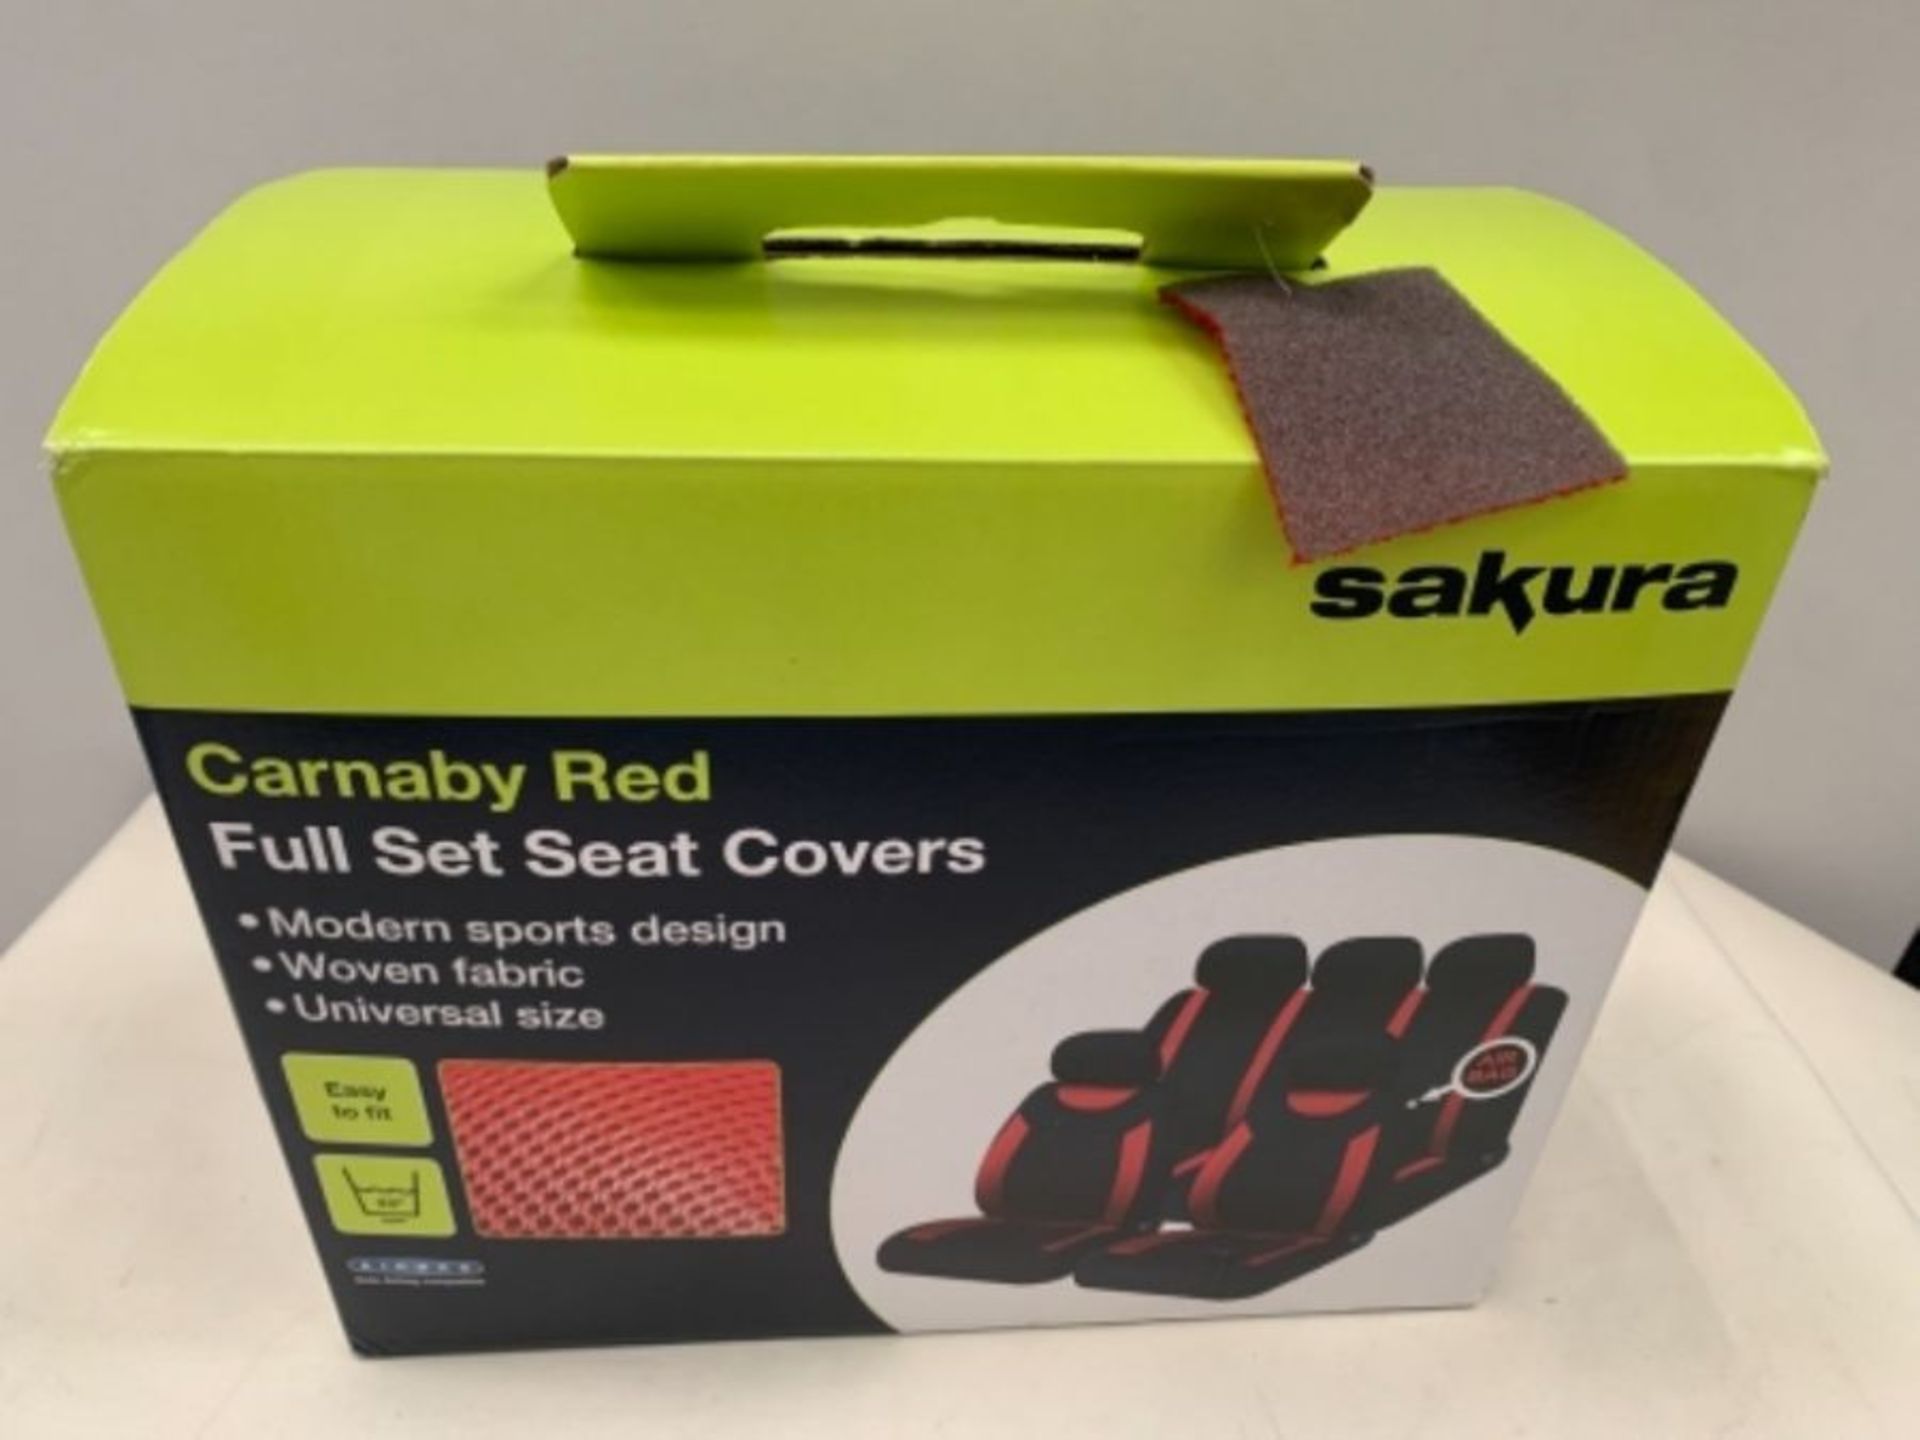 Sakura Car Seat and Headrest Covers Carnaby Red SS5293 - Full Set Universal Size Elast - Image 2 of 3